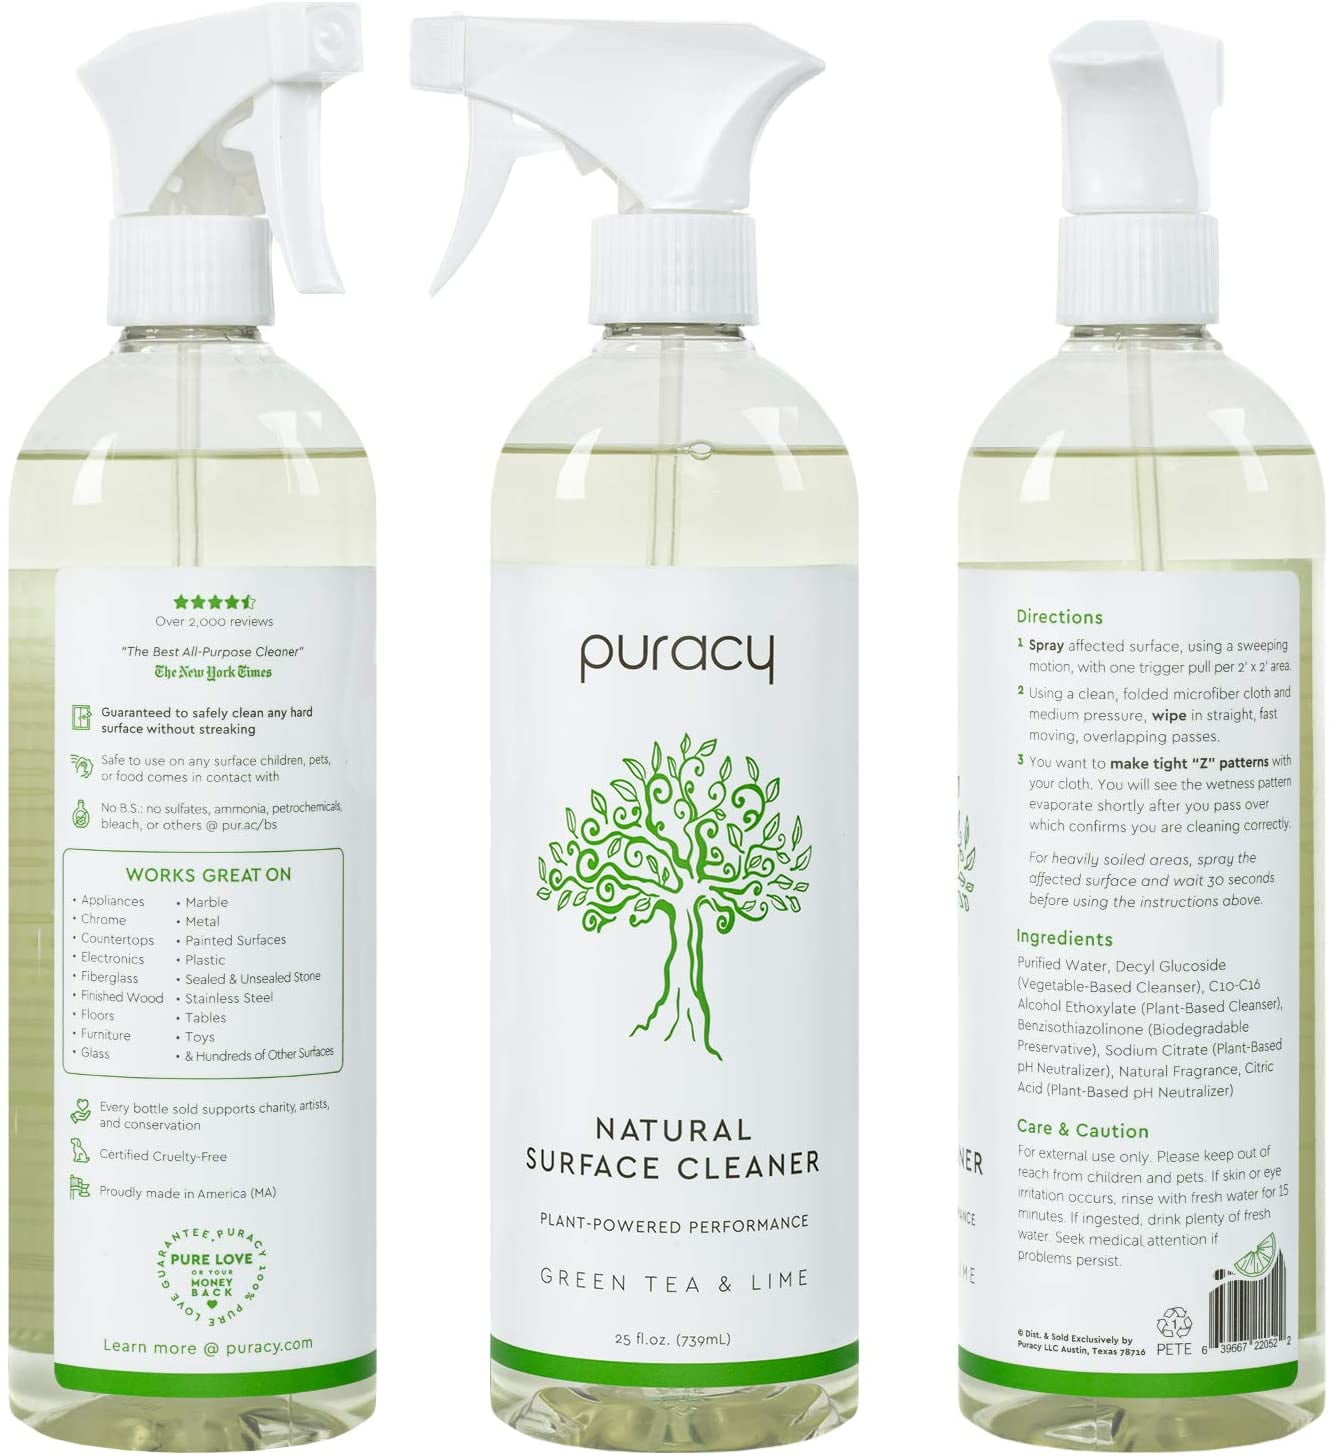 Puracy Natural Surface Cleaner Plant Powered Performance Green Tea